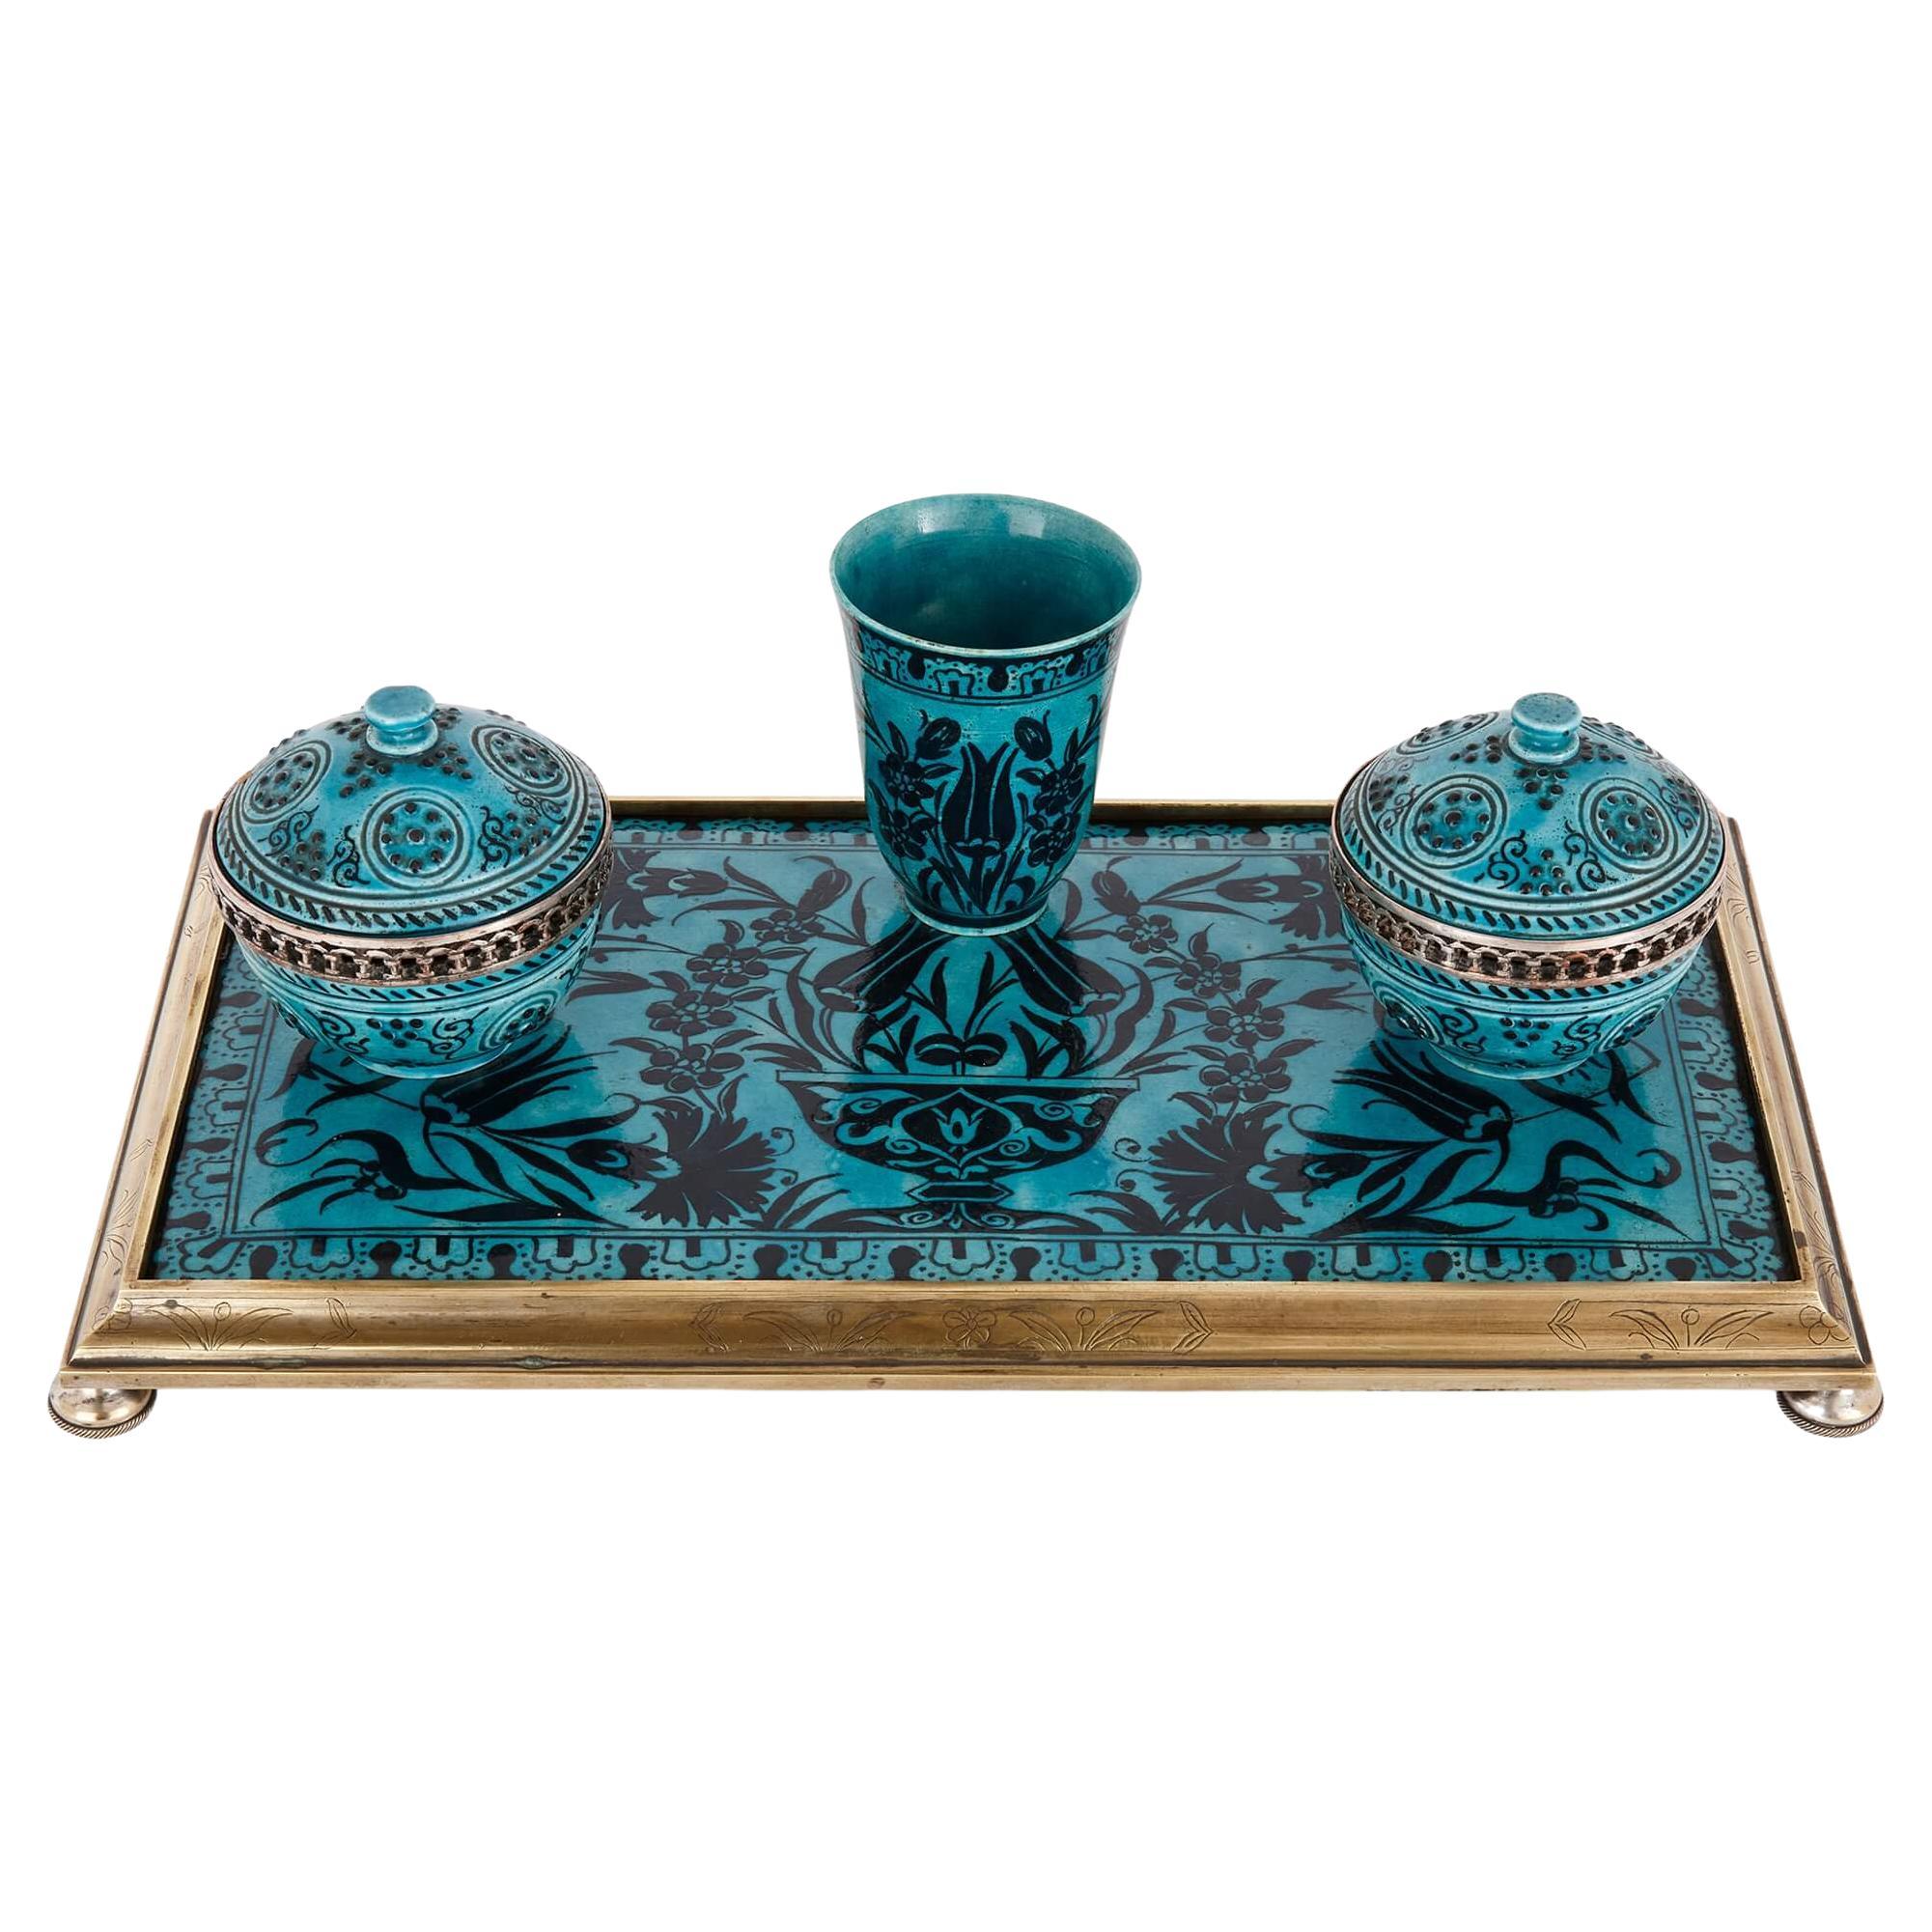 Iznik-Style Ceramic and Brass-Mounted Ink Stand